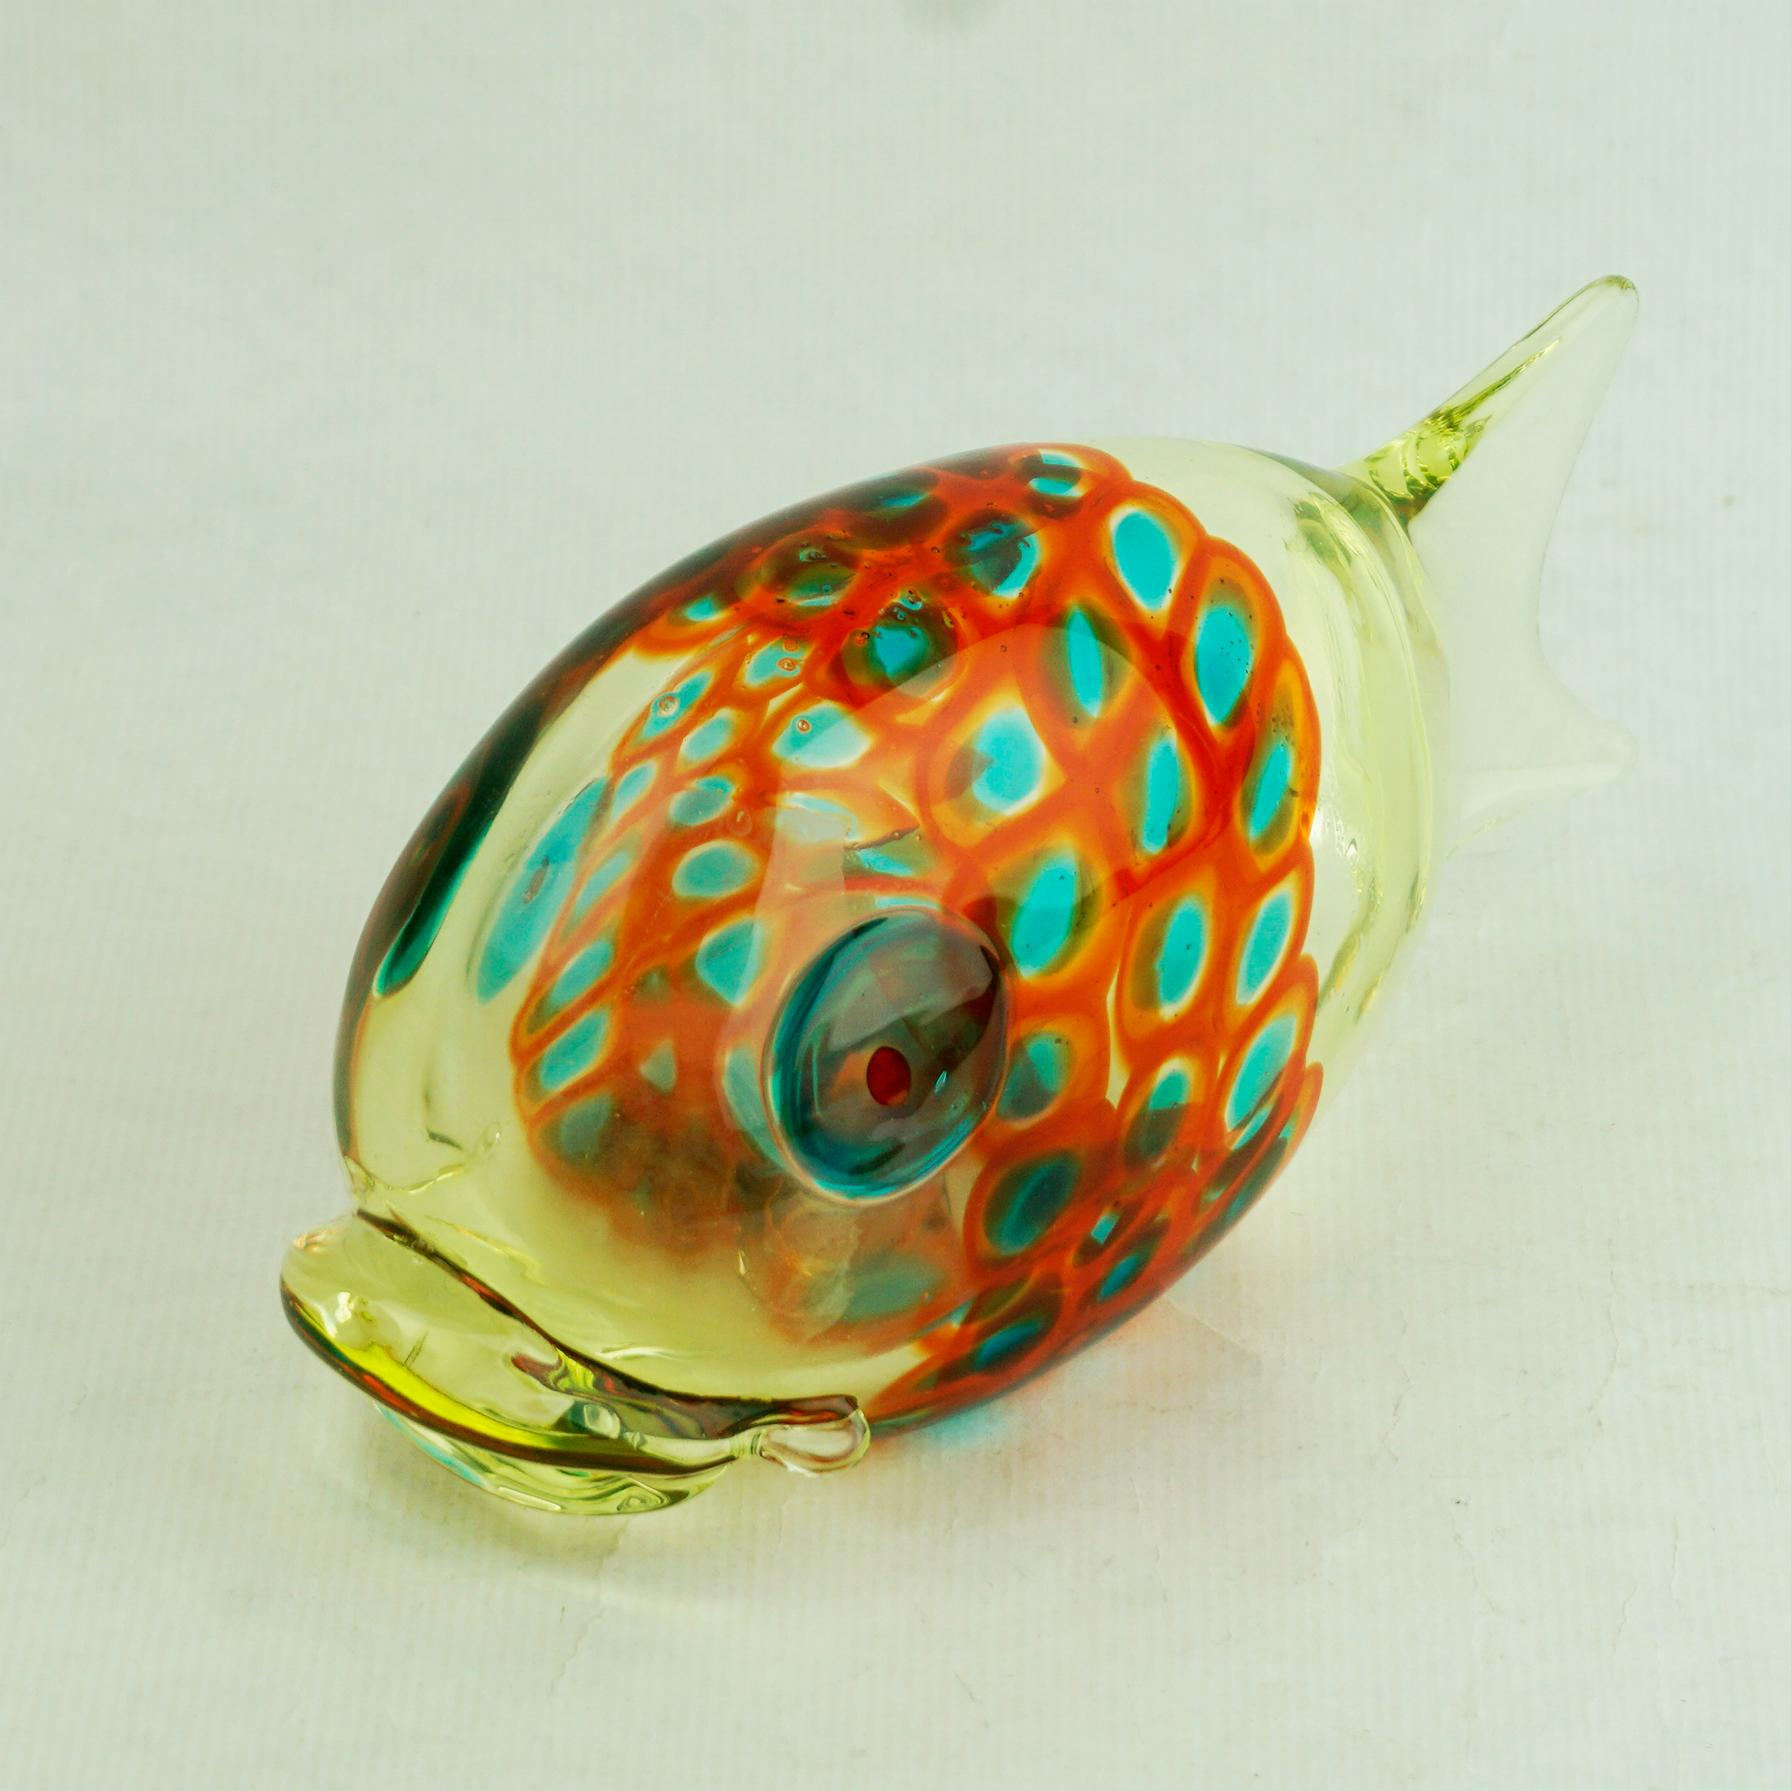 This amazing light green hand blown Uranium glass fish was created by Antonio Da Ros in the 1960s and manufactured by Vetreria Gino Cenedese, Murano, Italy. 1960s.
It features a light green body with circumferential band of orange-red and